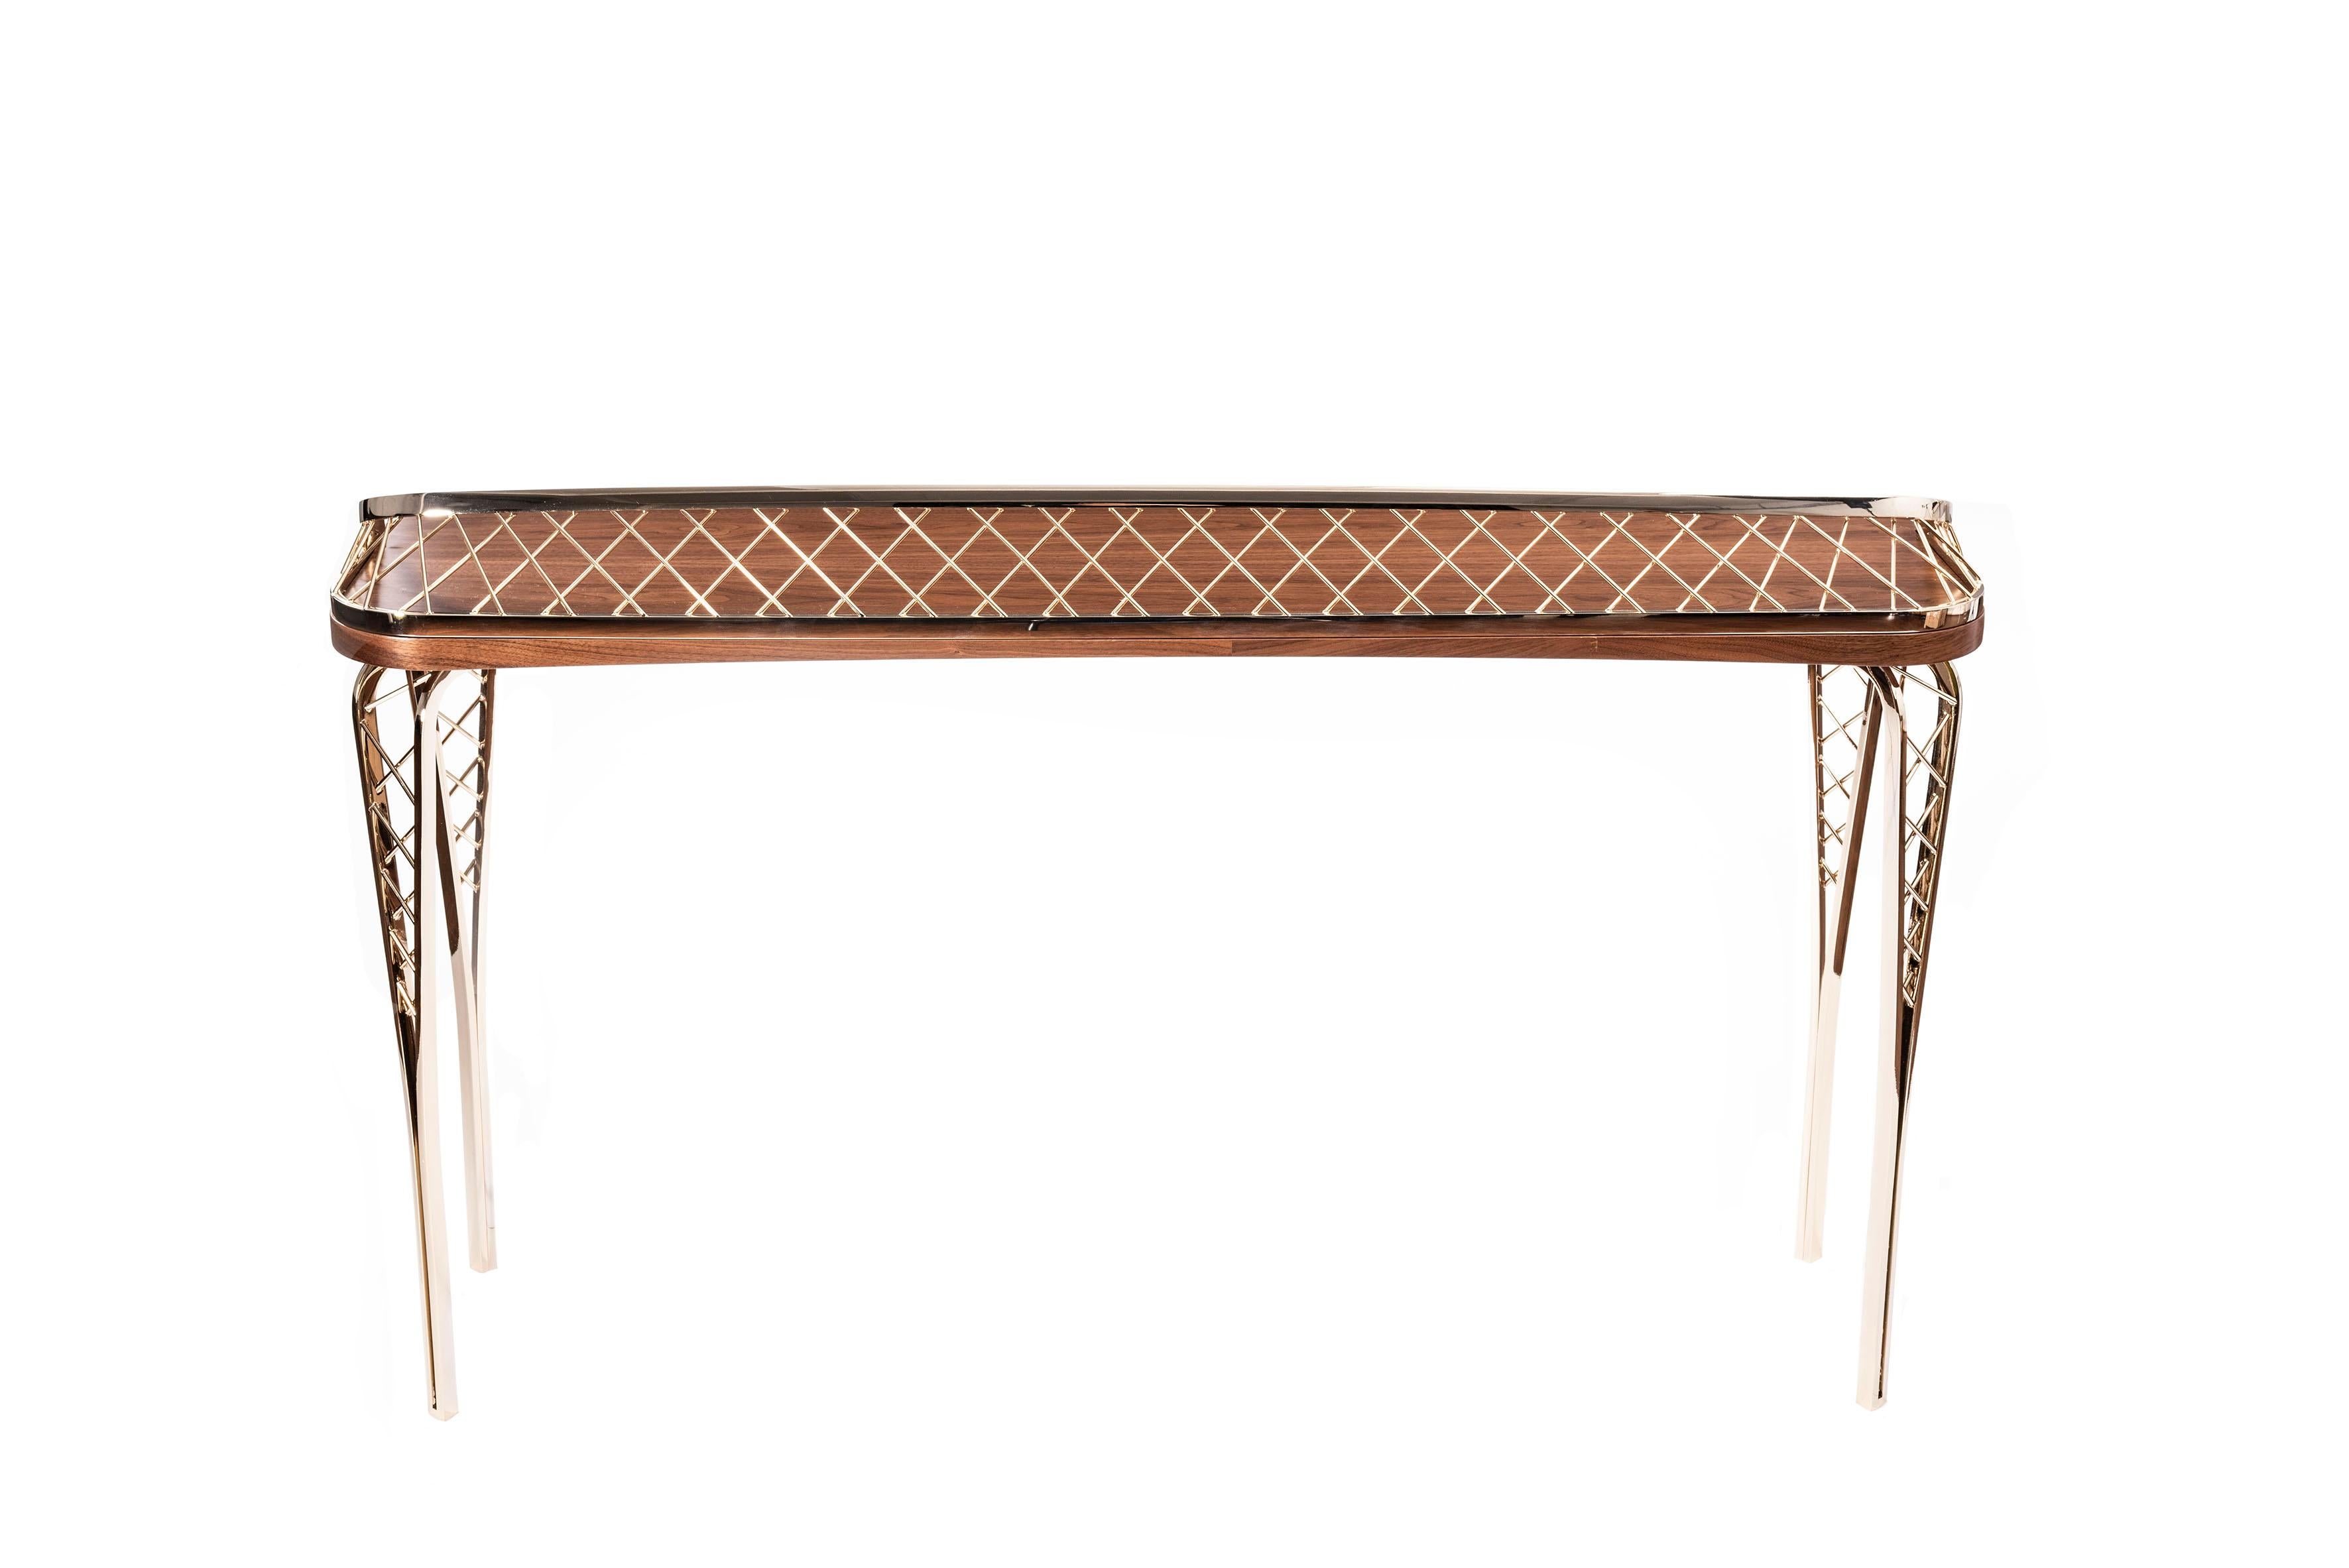 Modern Desk Wood and Steel by Cyril Rumpler, Gustav.
The shape of the top and its variations in thickness combined with the metal mesh create an effect of lightness. The combination of straight transverse lines and curves and the alternation of full